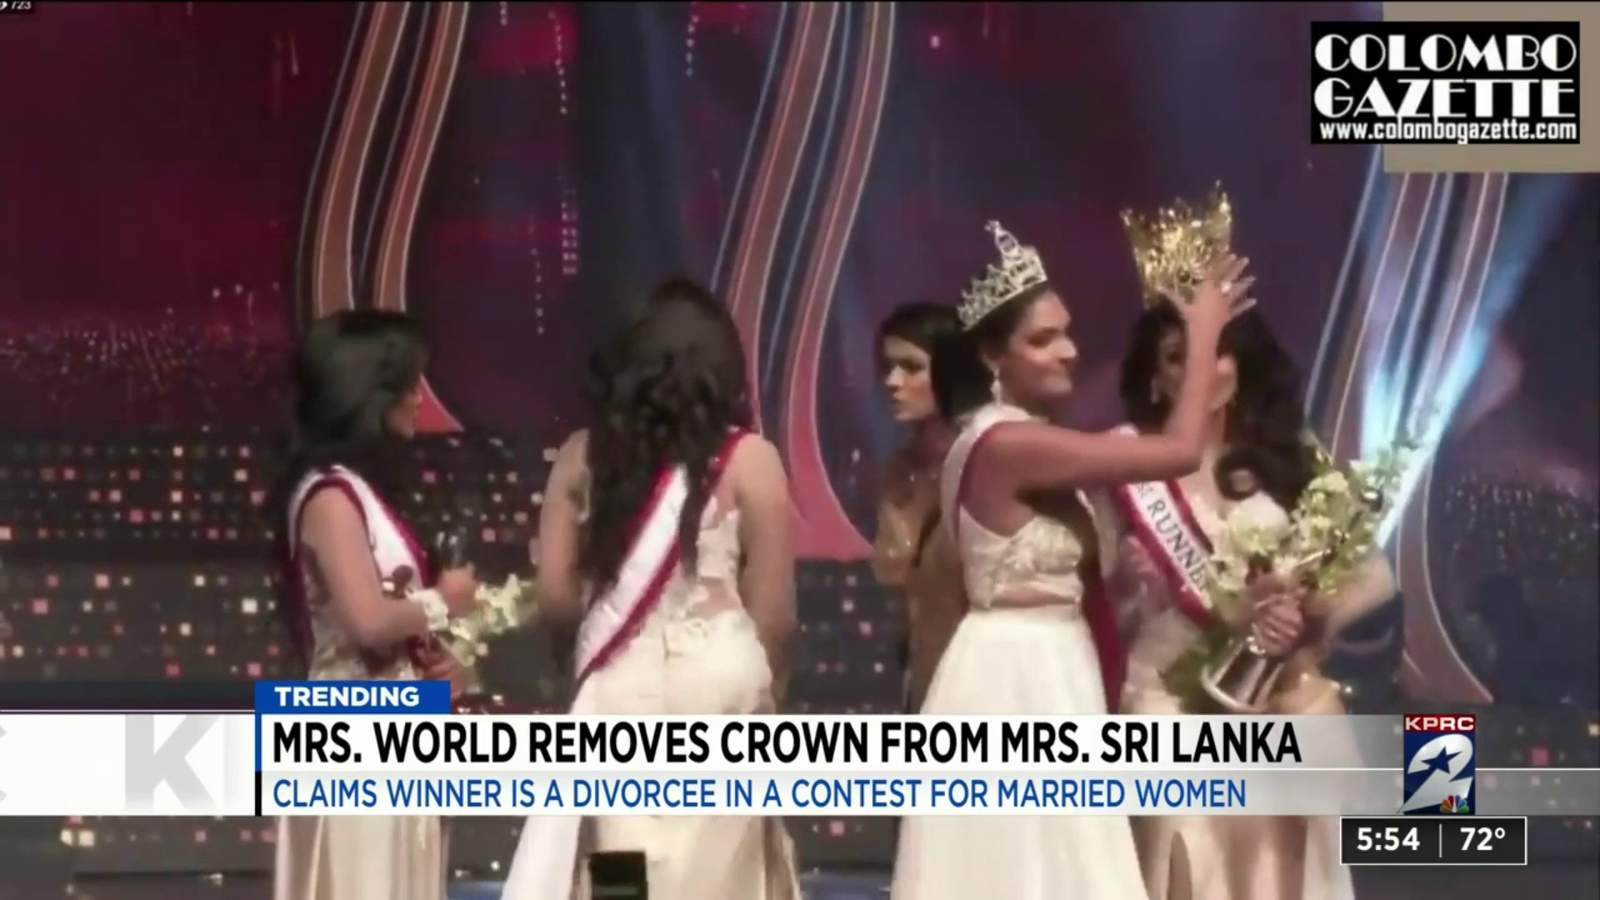 Mrs. World removes crown from Mrs. Sri Lanka after falsely claiming her ineligibility as a divorcee